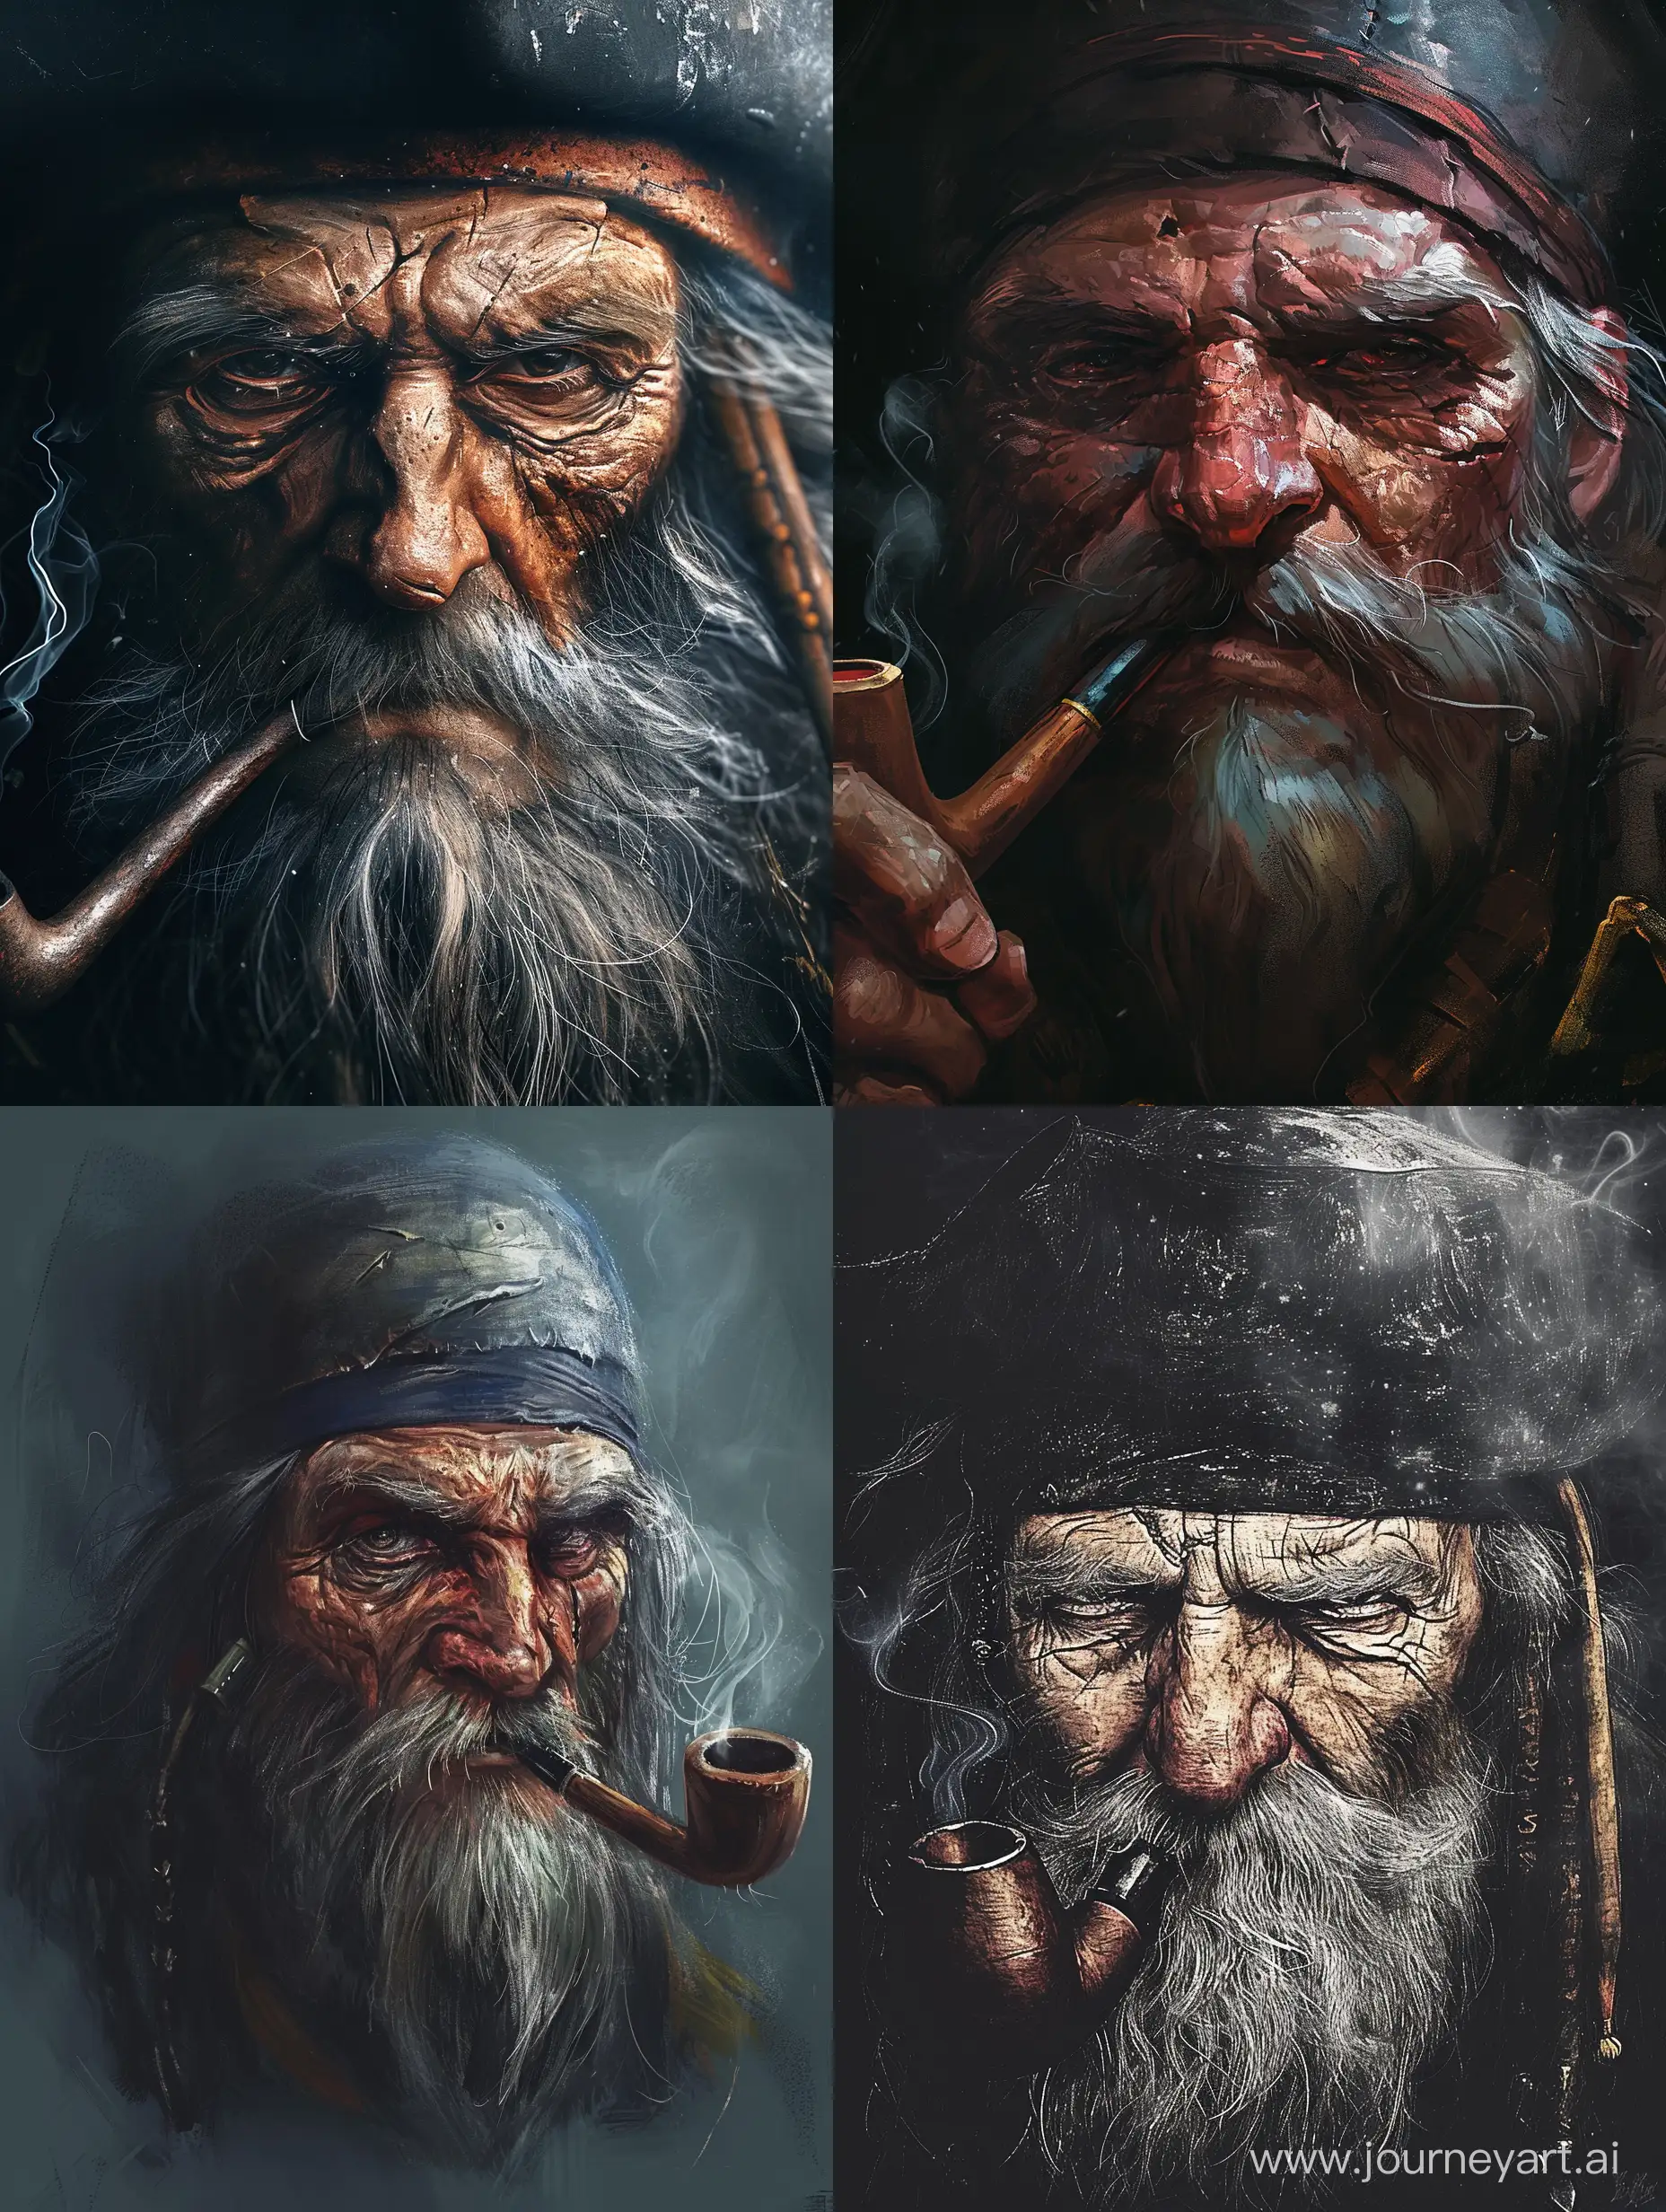 Experienced-Pirate-Captain-Greybeard-Enjoying-a-Pipe-in-34-View-Portrait